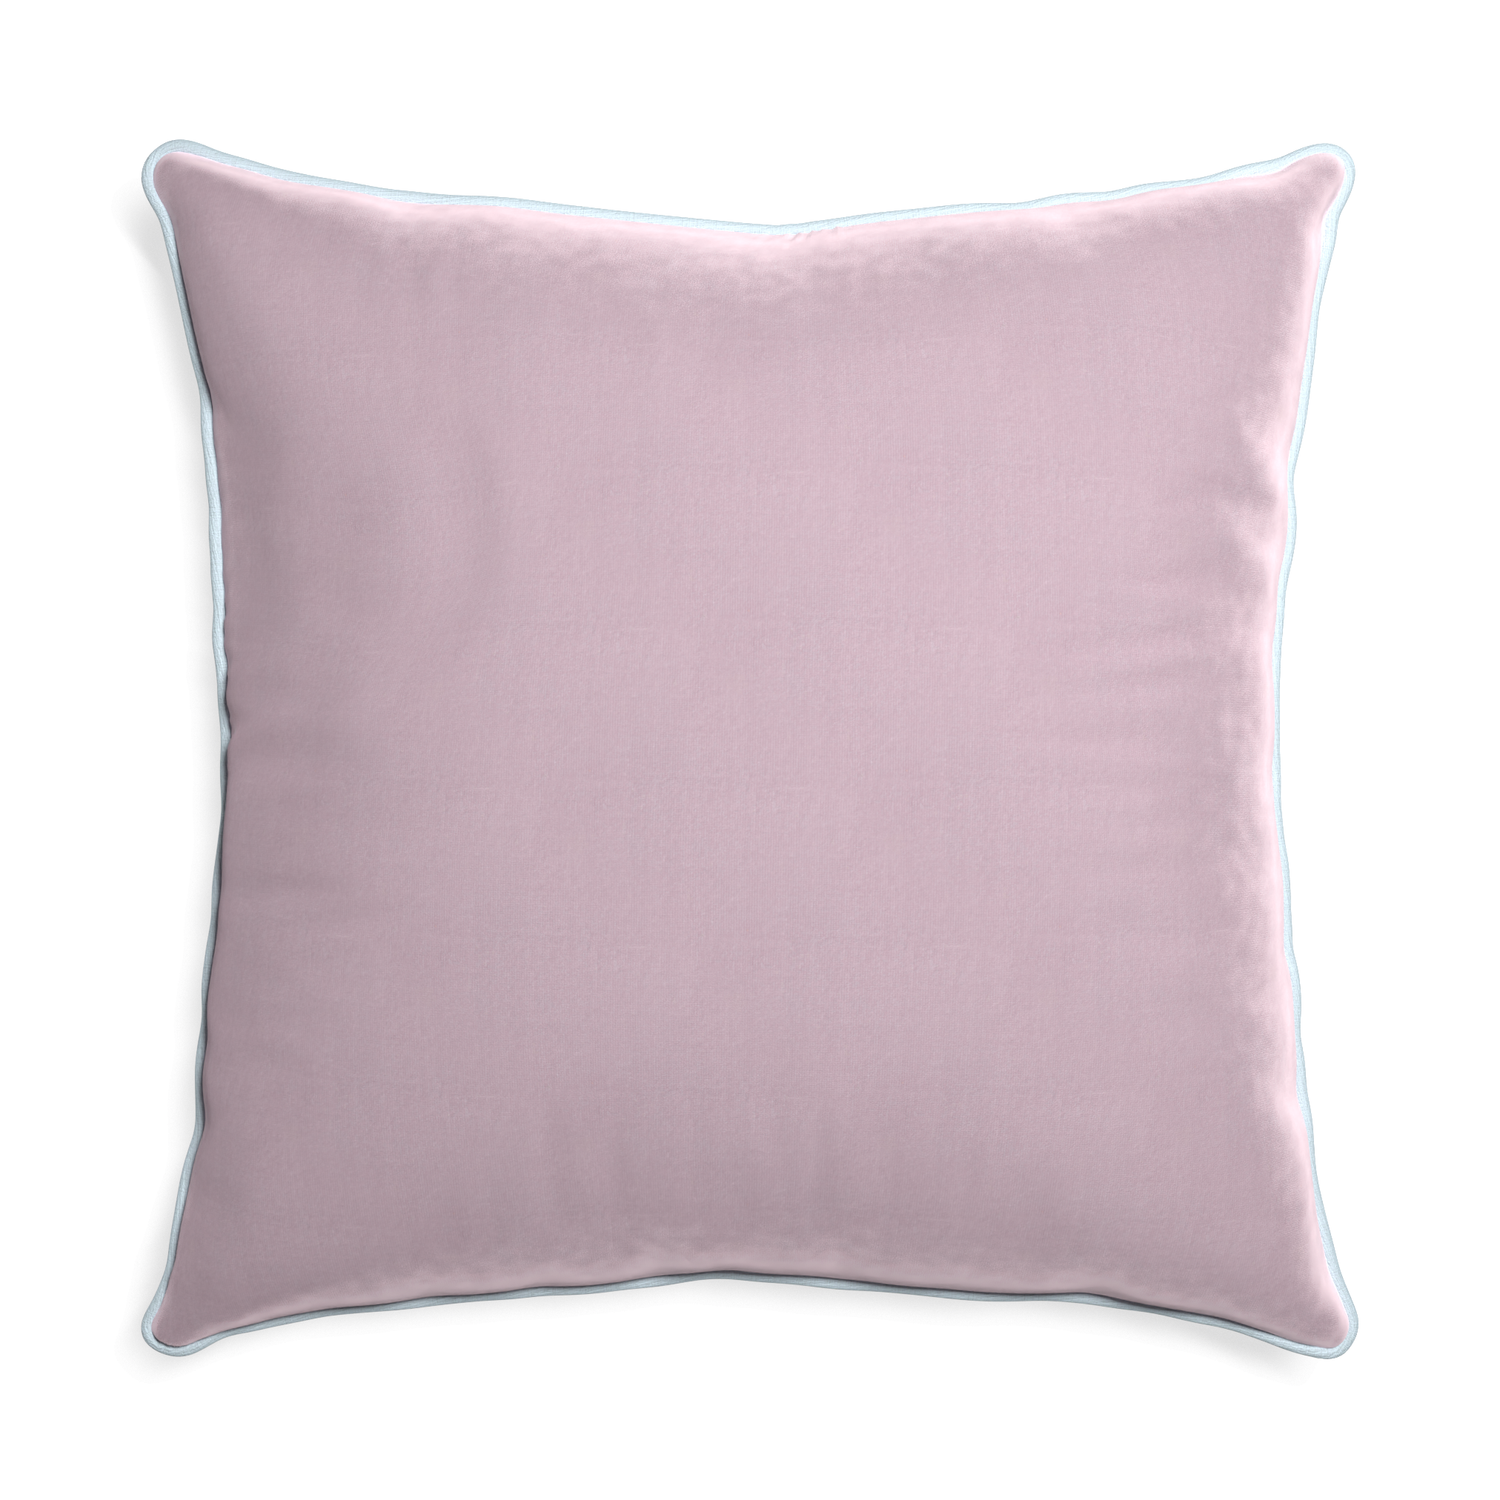 Euro-sham lilac velvet custom lilacpillow with powder piping on white background